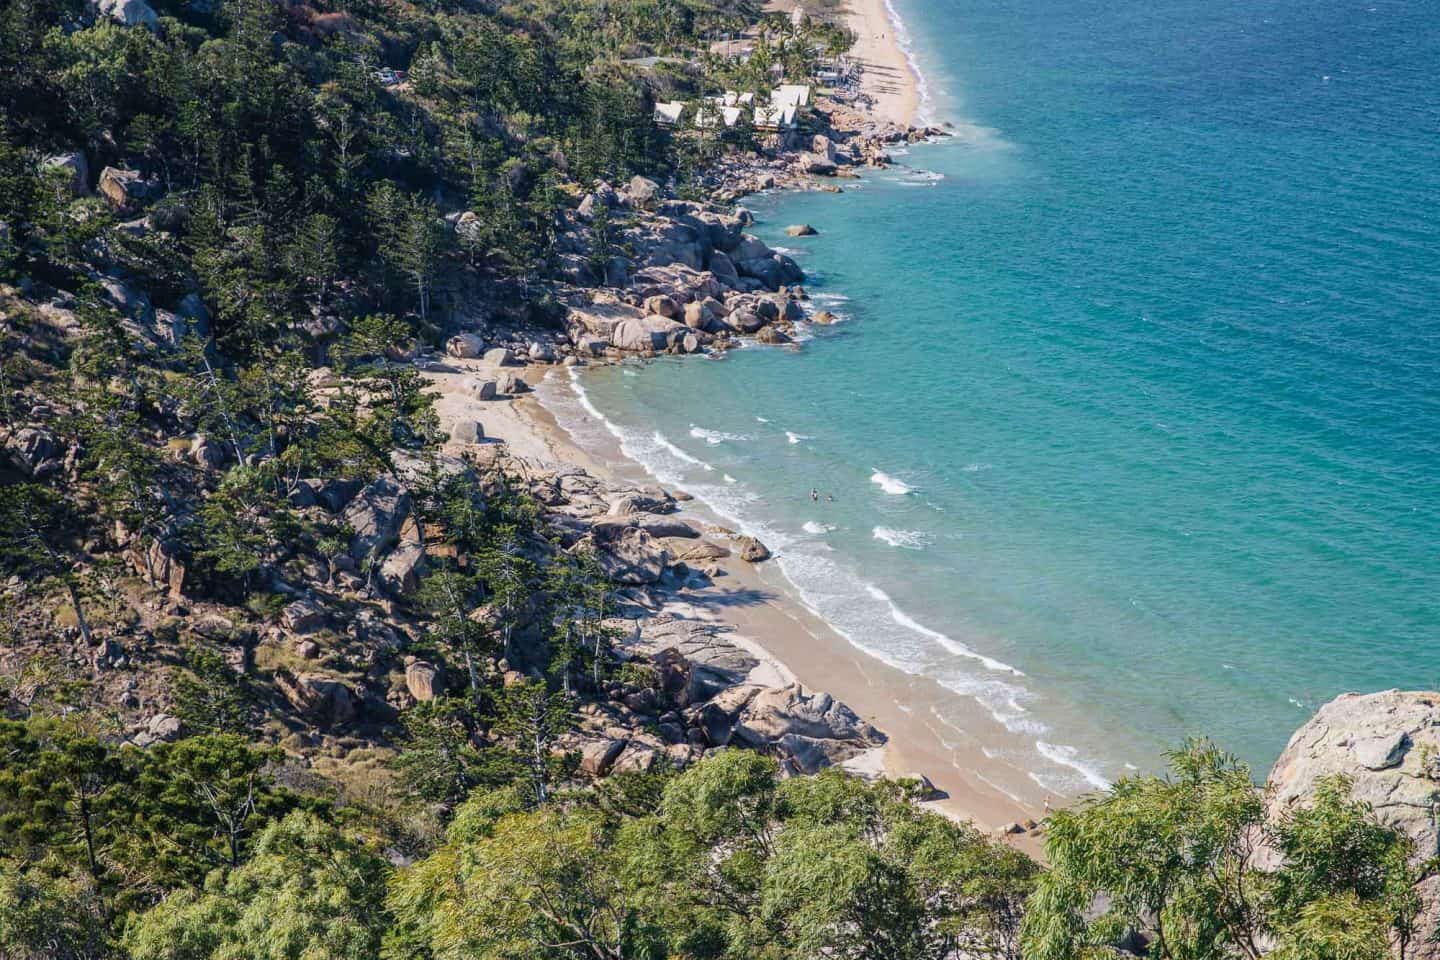 magnetic island, things to do on magnetic island, things to do in magnetic island, magnetic island australia, magnetic island queensland, rocky bay magnetic island